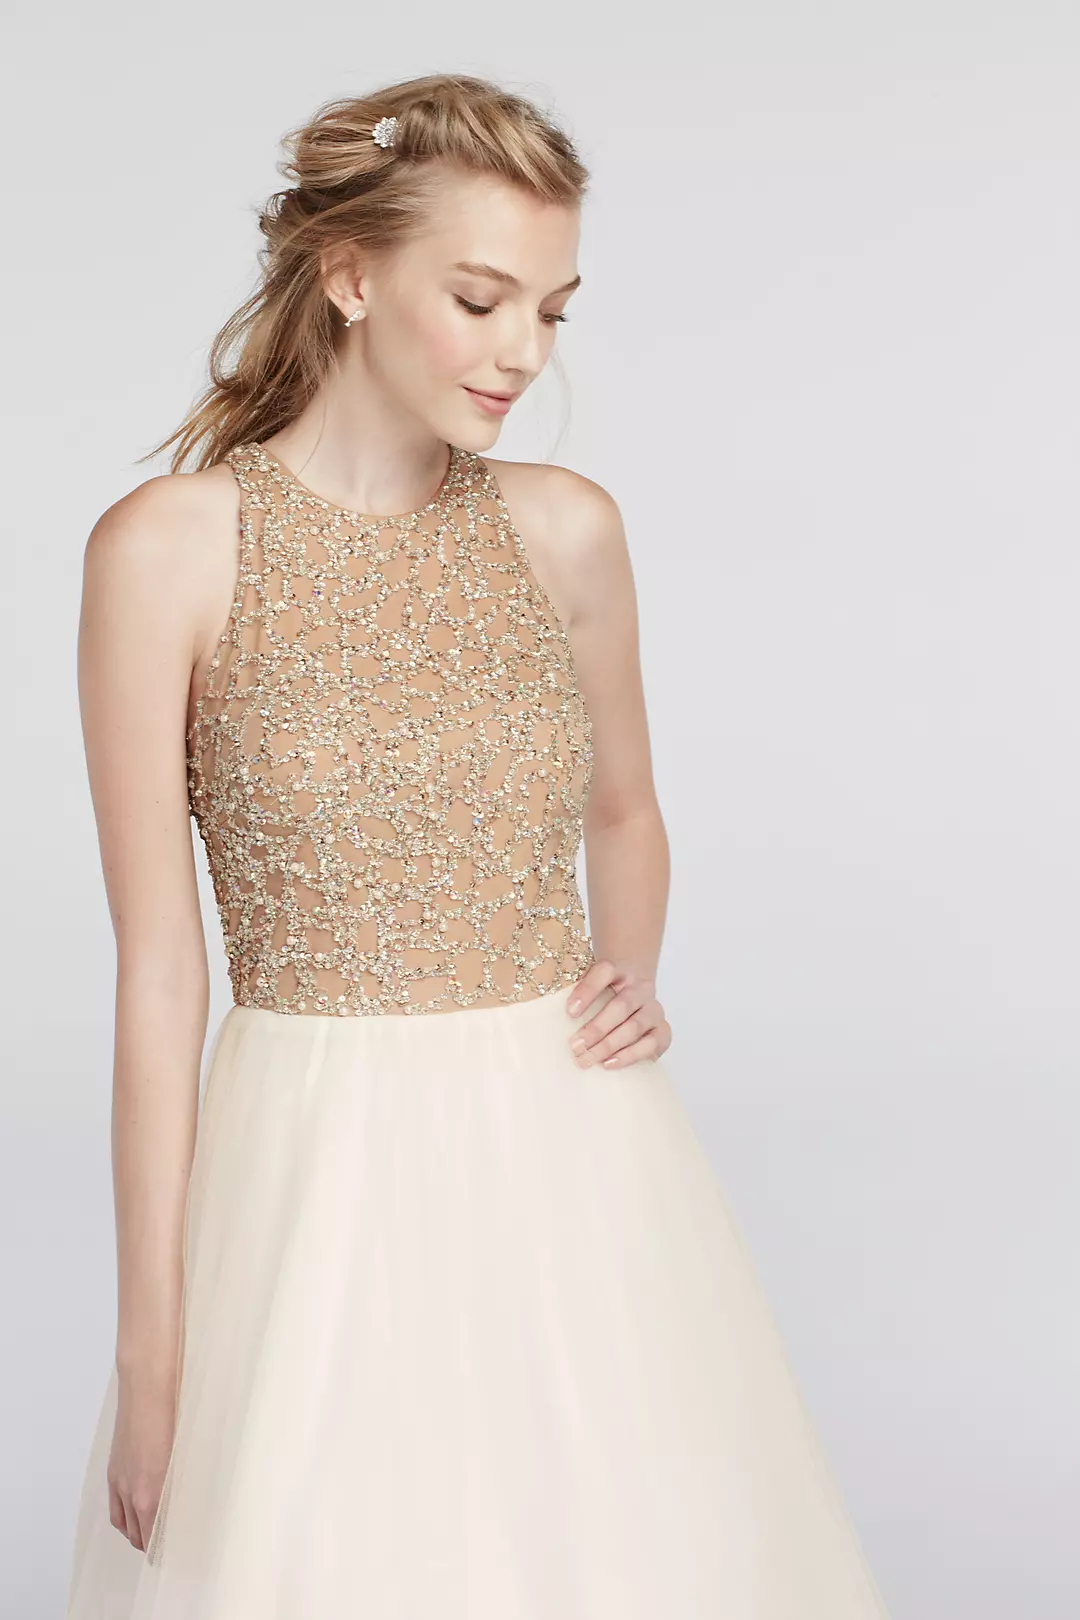 Beaded High Neck Prom Dress with Ball Gown Skirt Image 3